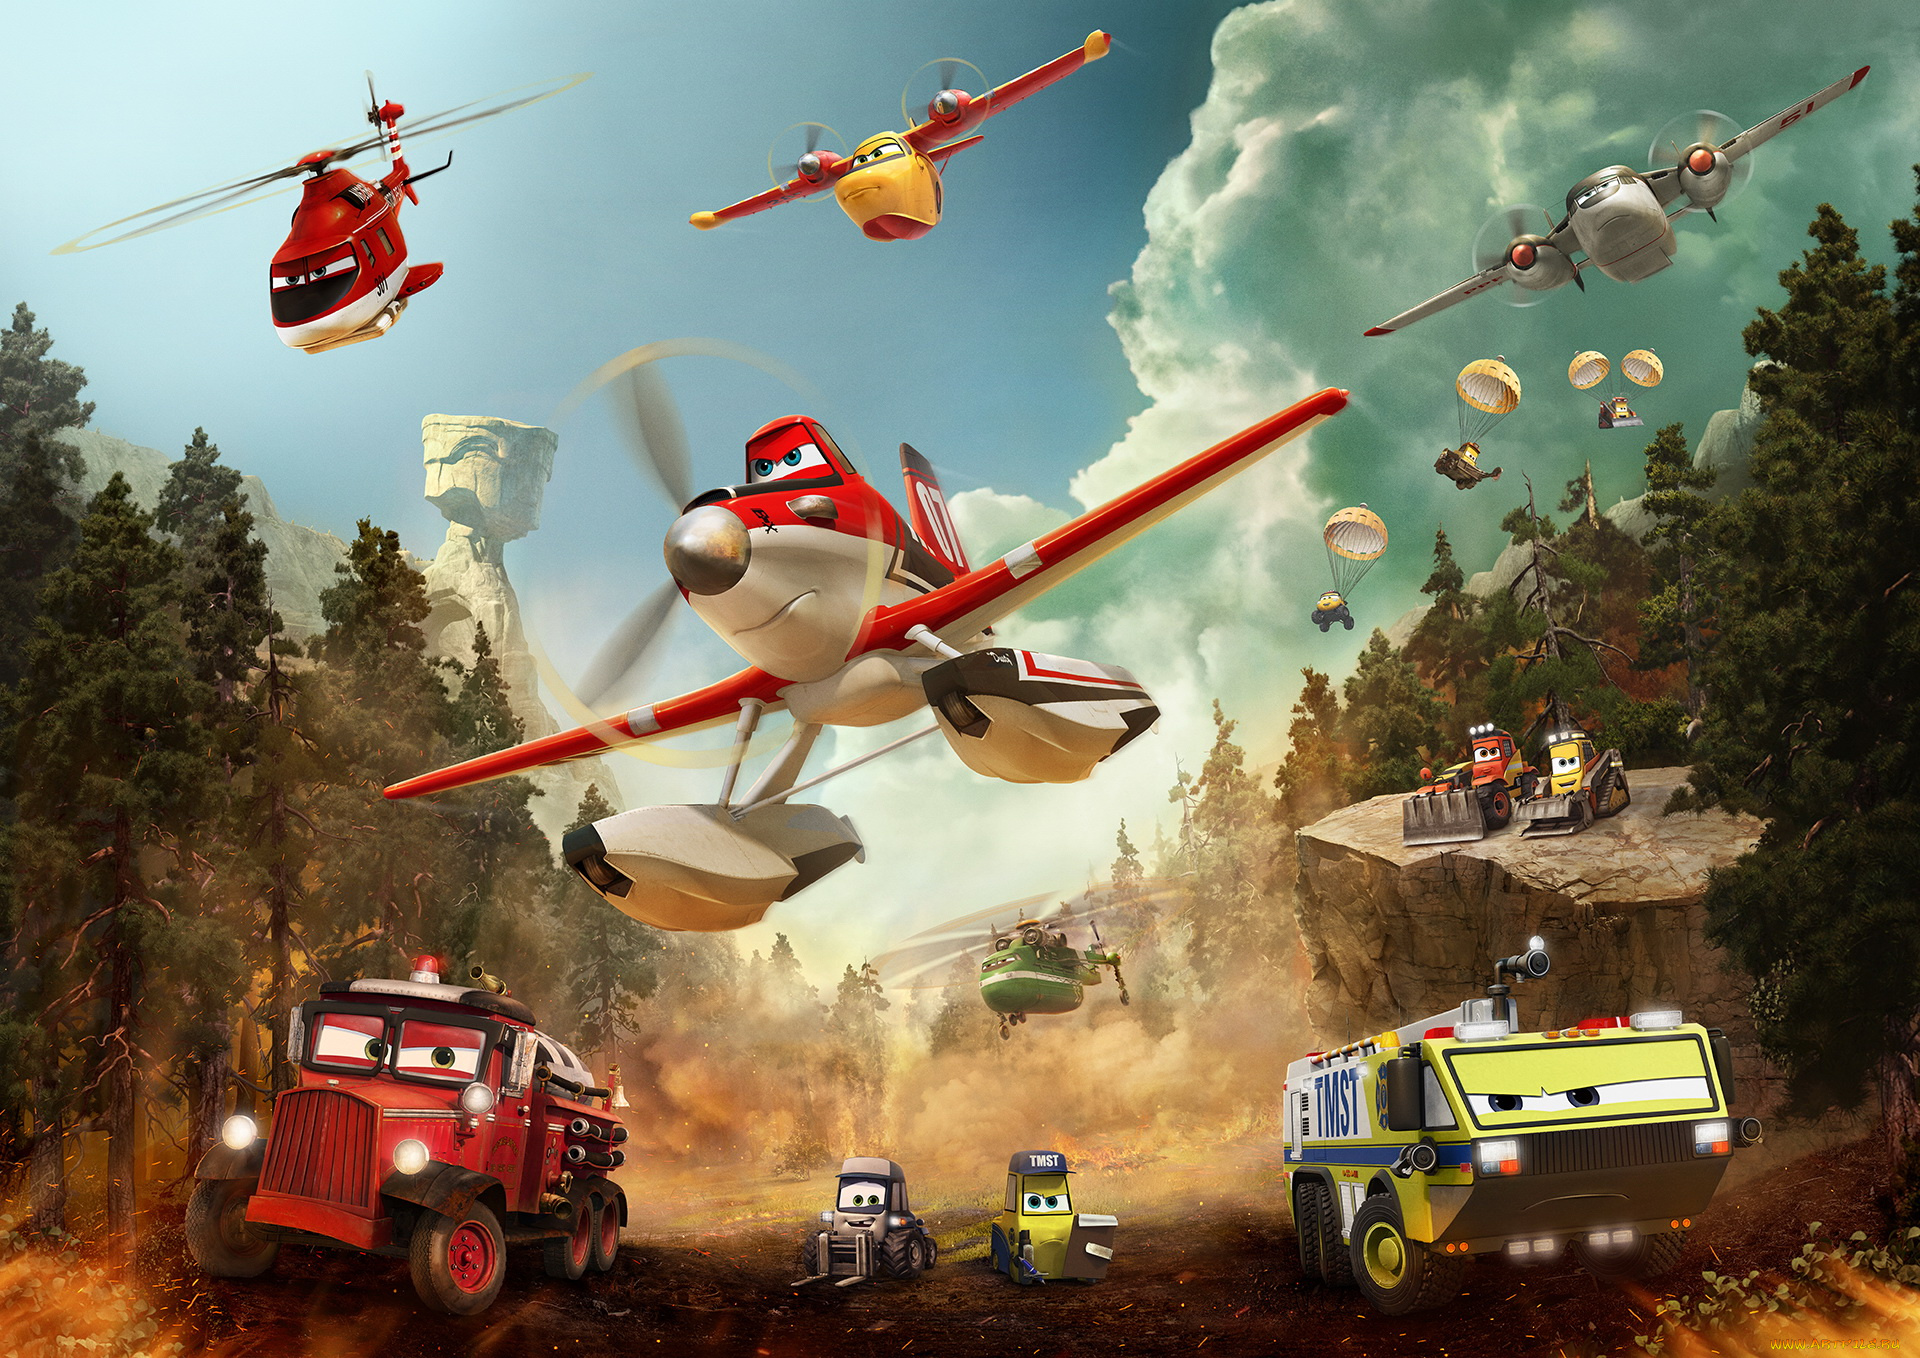 planes, , fire, &, rescue, мультфильмы, , fire, and, rescue, самолёты